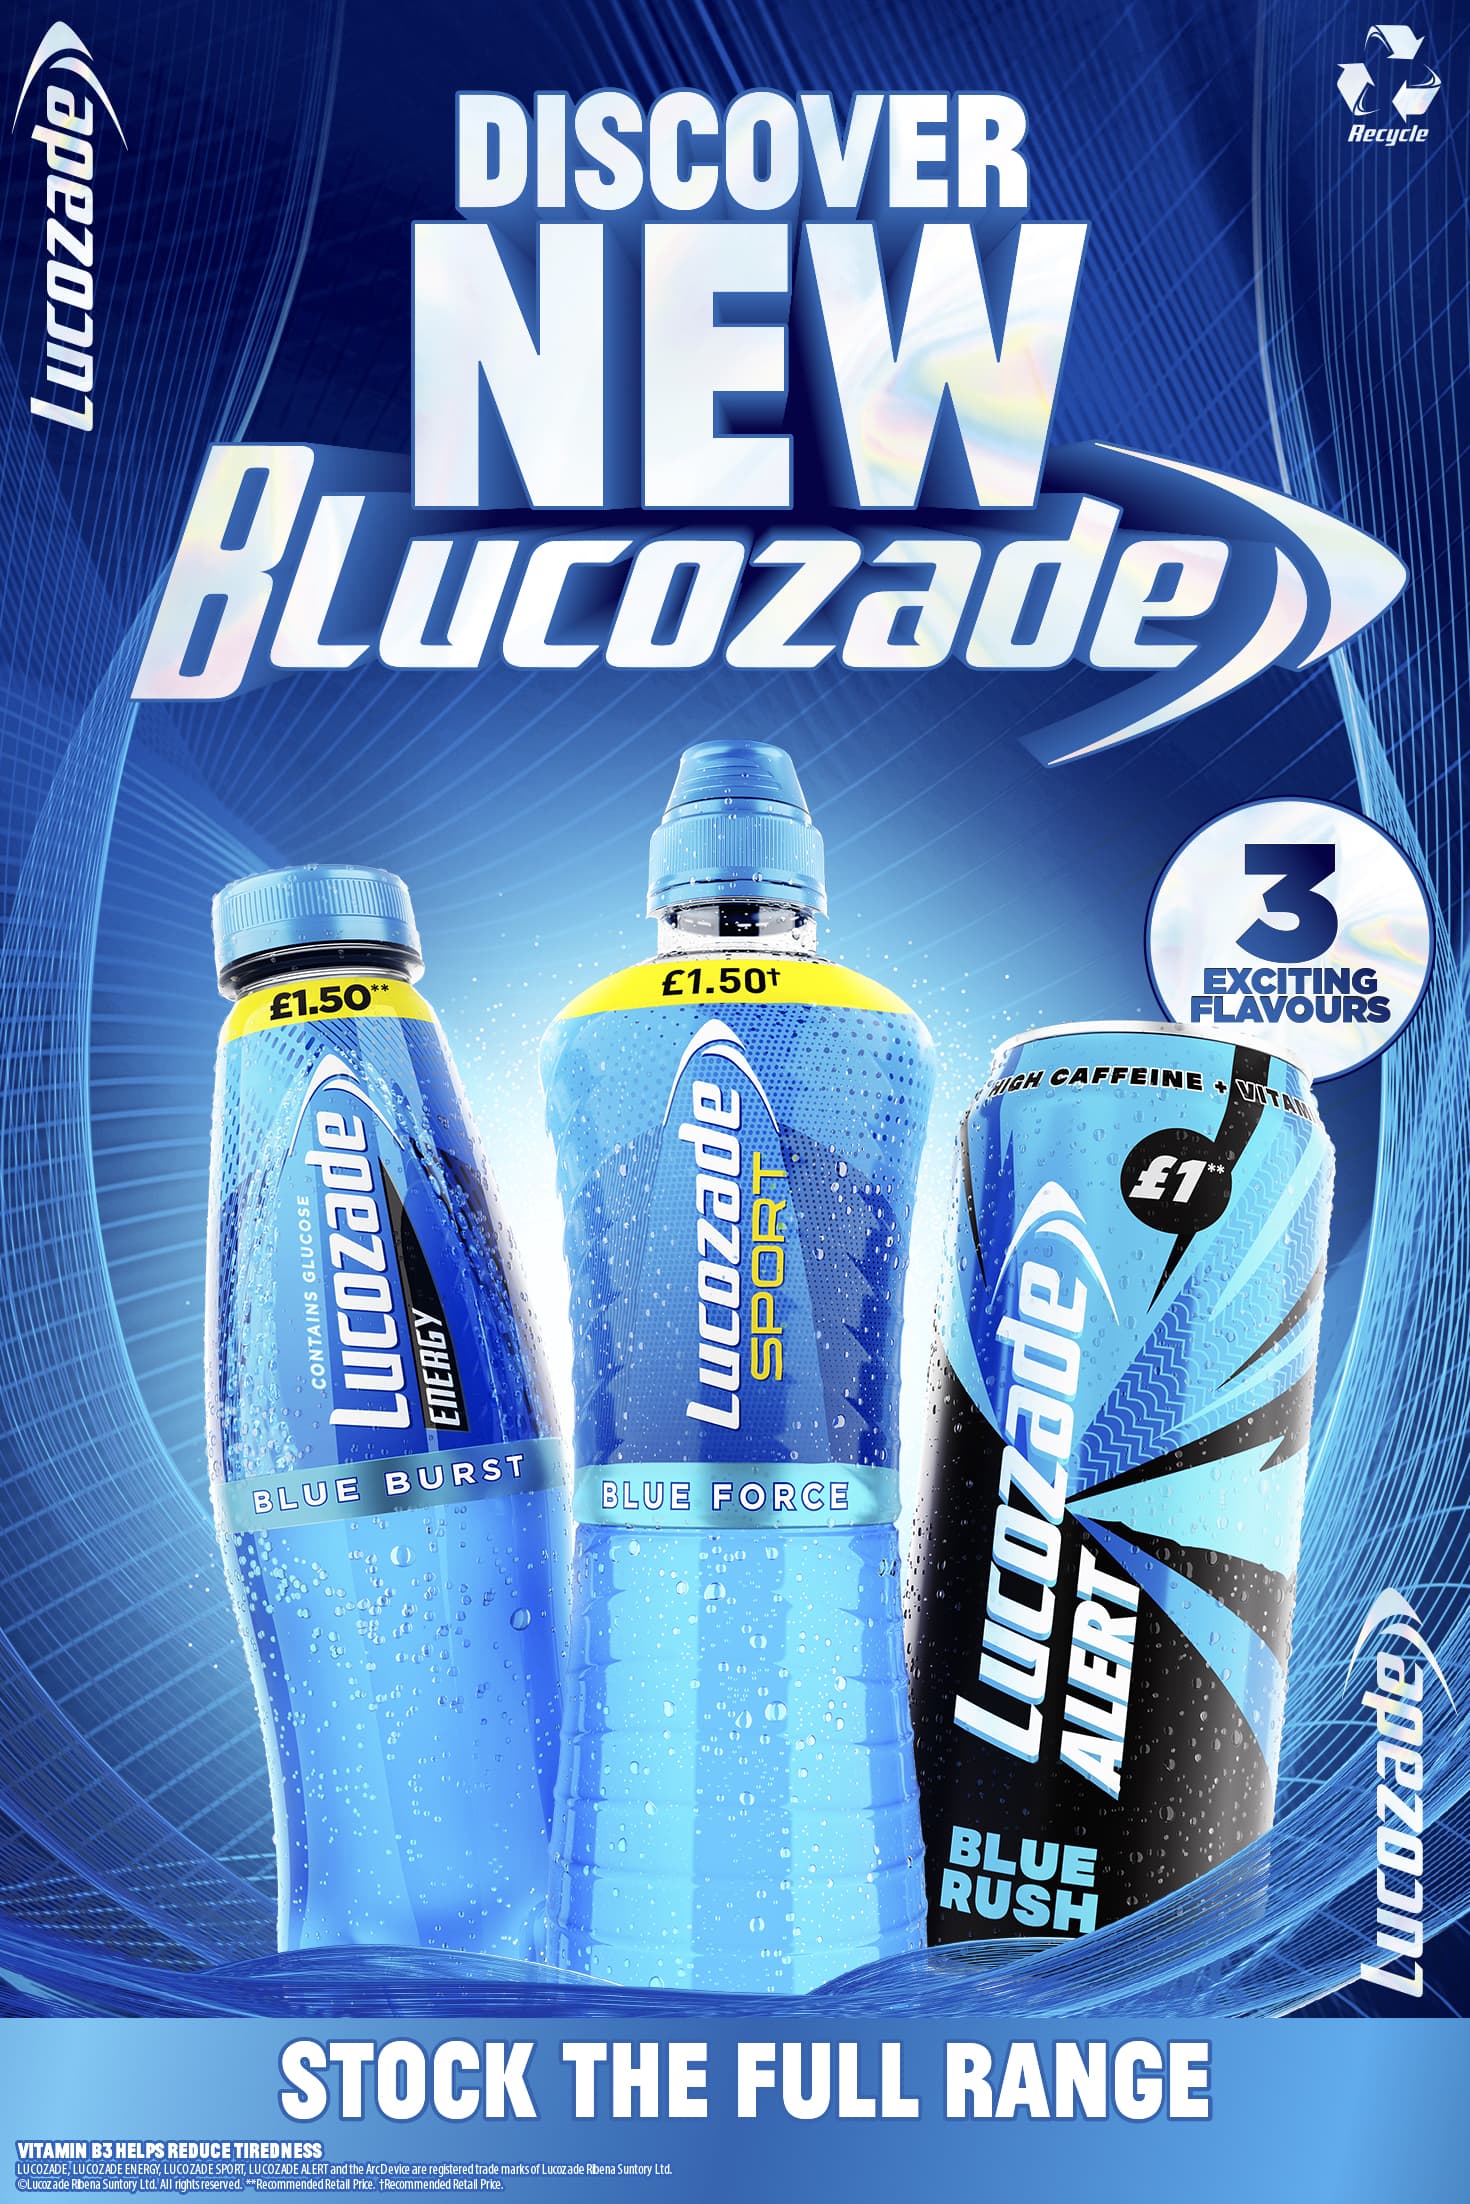 Discover NEW Blucozade